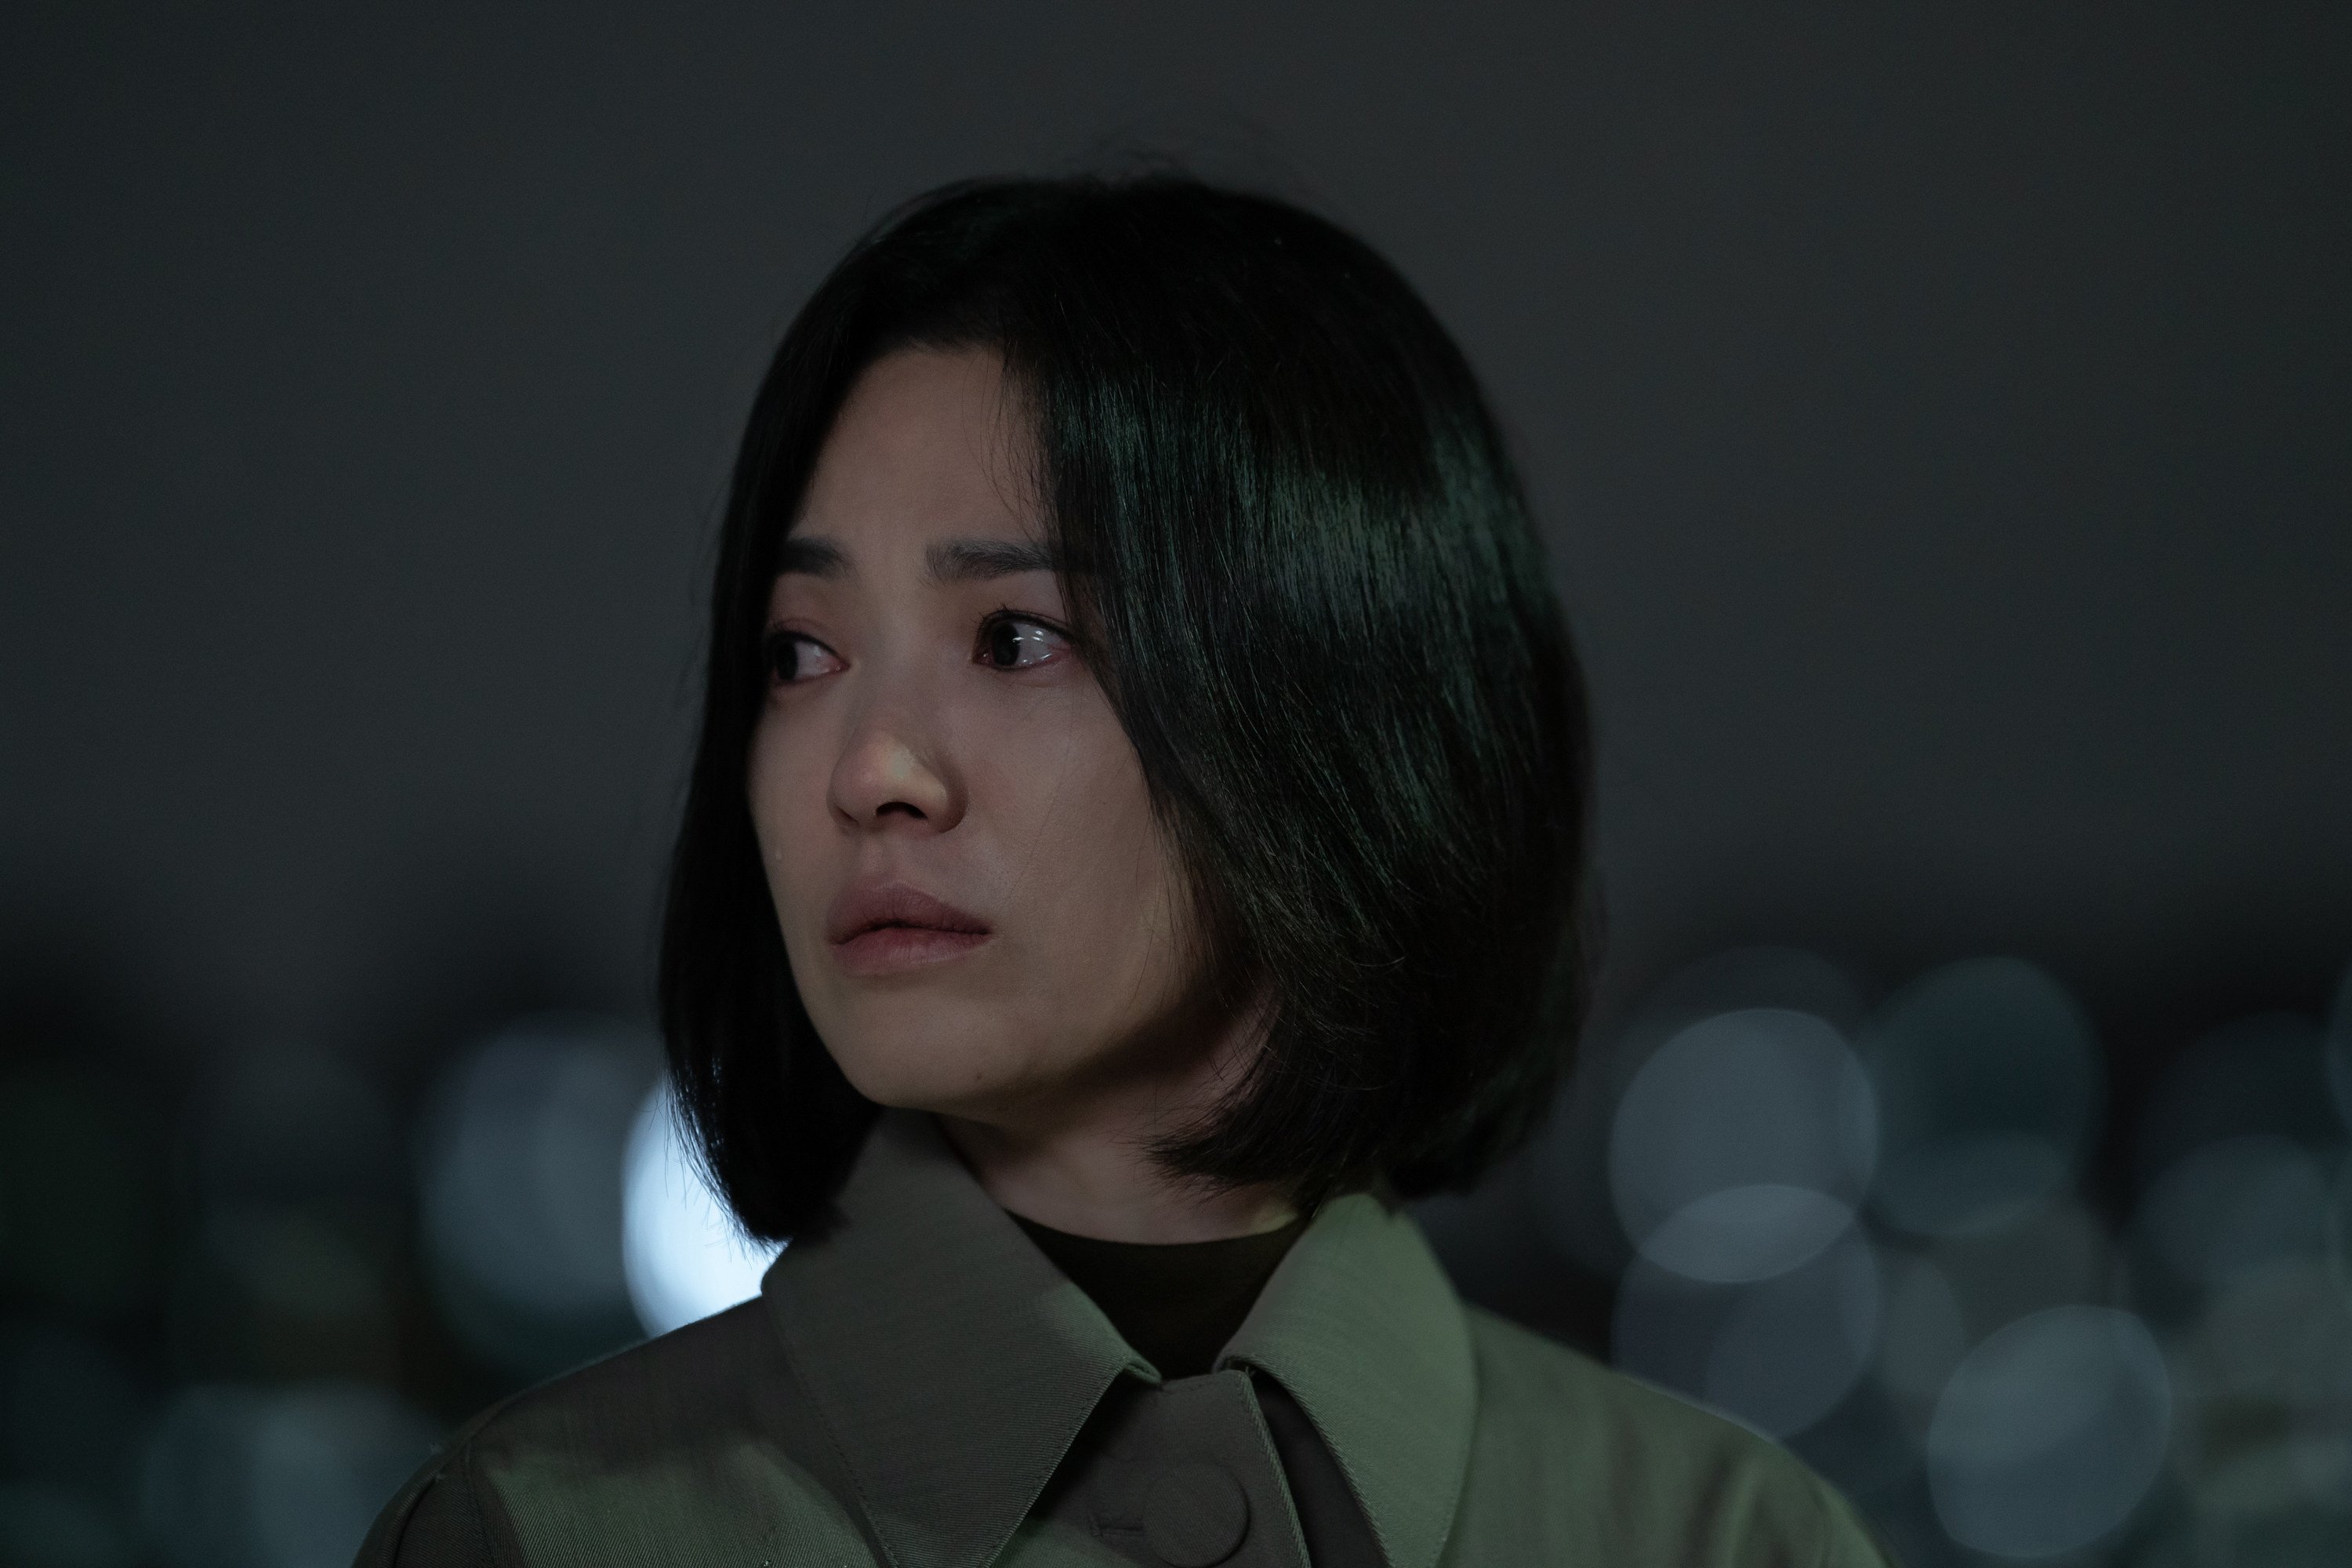 Song Hye-kyo as Moon Dong-eun in a still from The Glory. Part 2 of the K-drarma series begins screening on March 10. Photo: Netflix